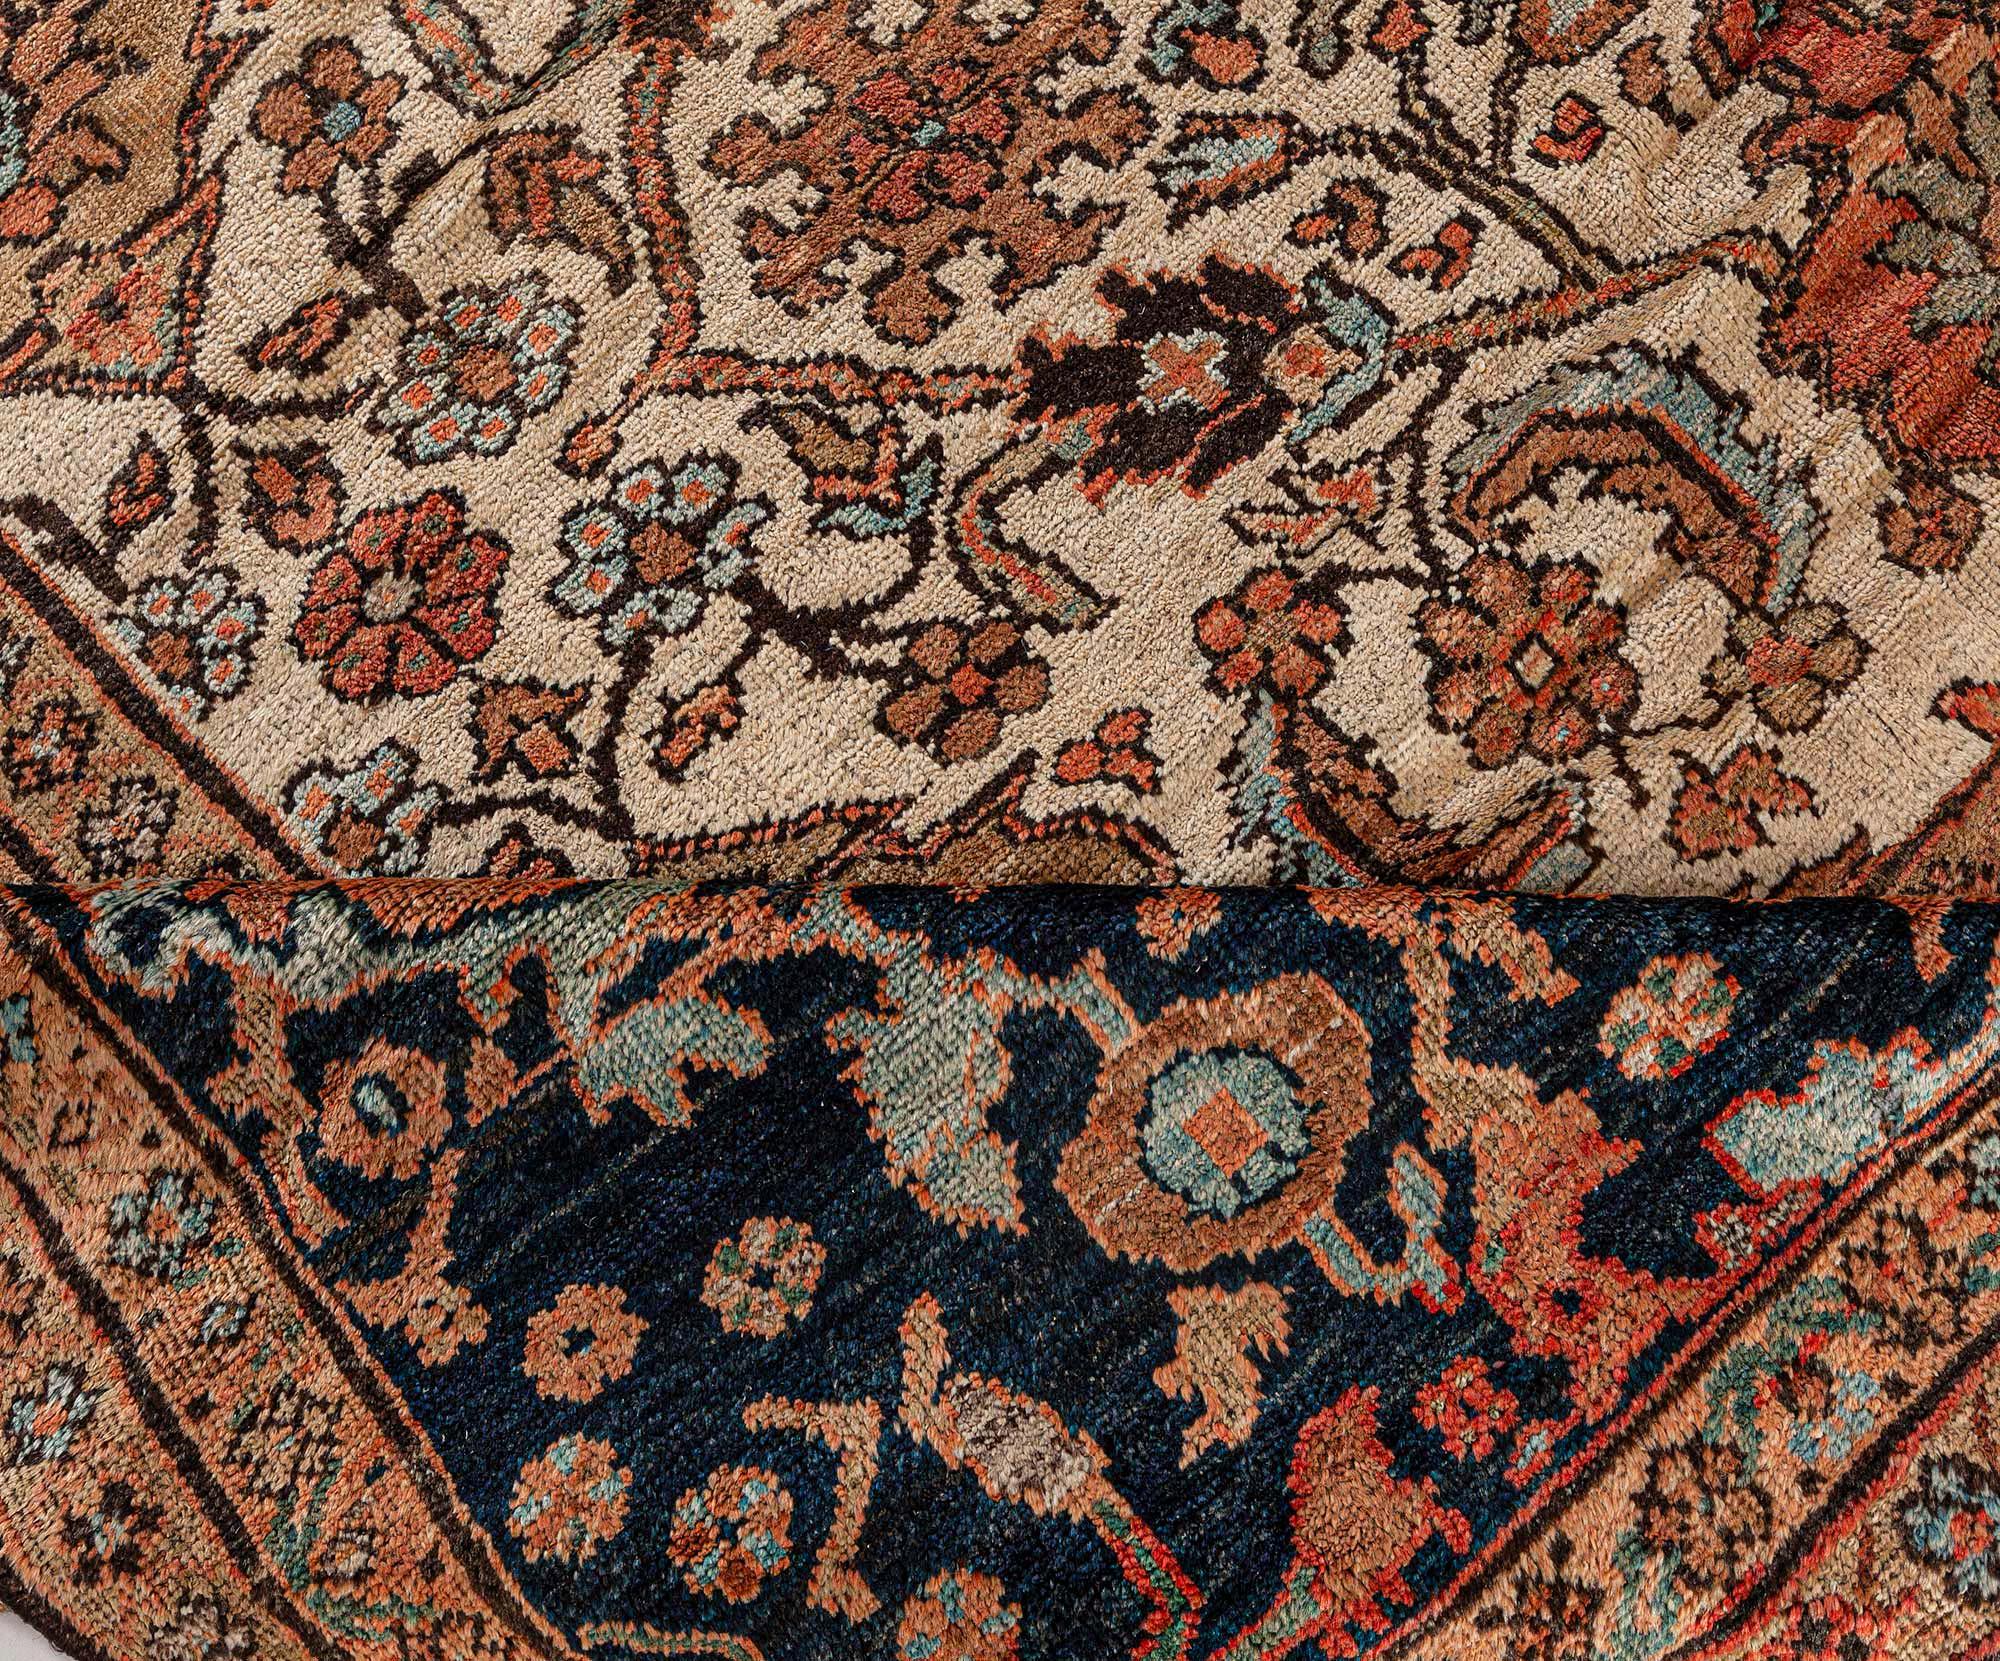 19th Century Persian Sultanabad Hand Knotted Wool Rug
Size: 12'9